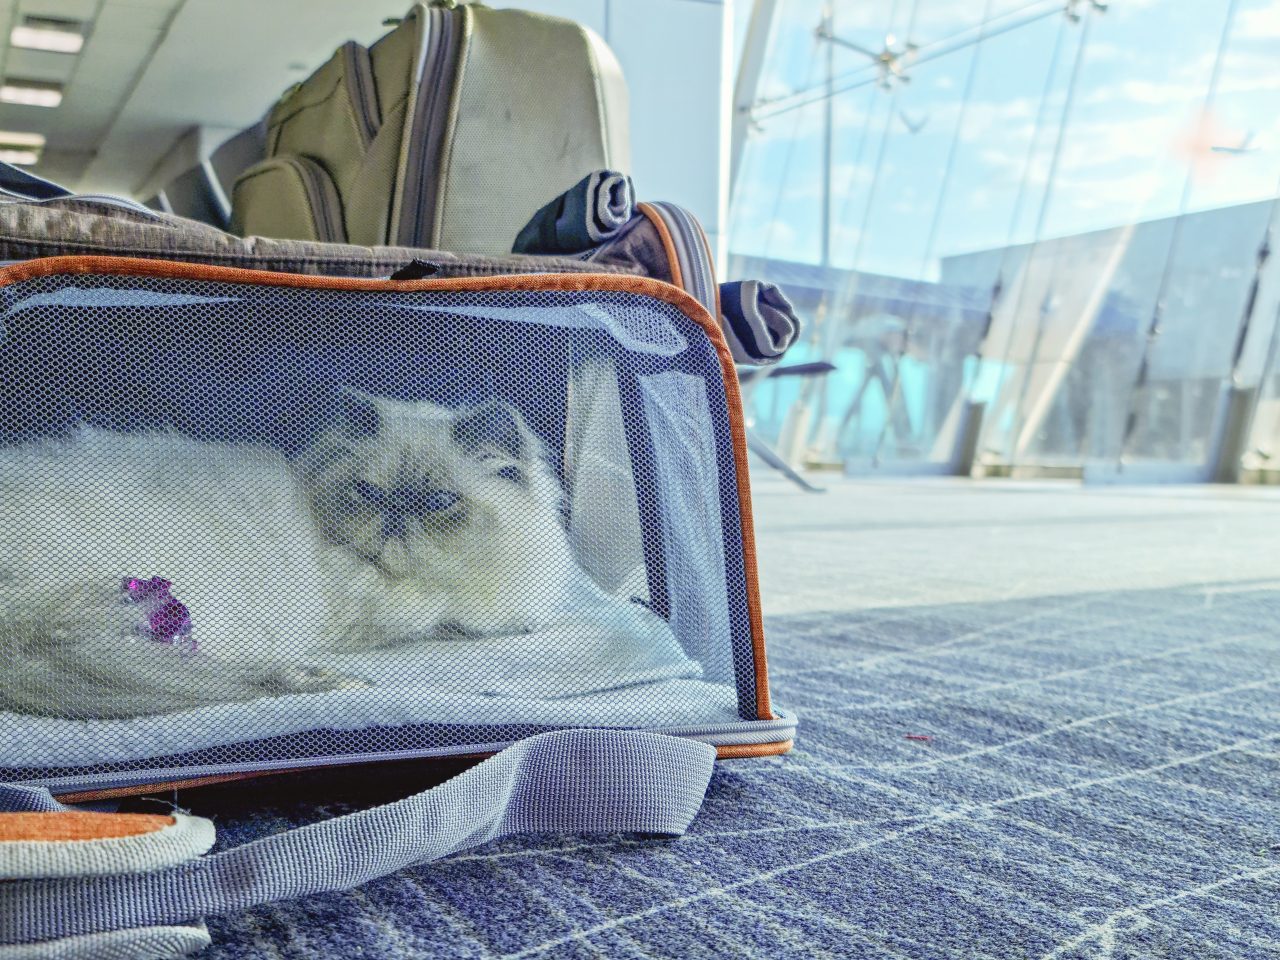 Grumpy white cat in a transporter at the airport lounge